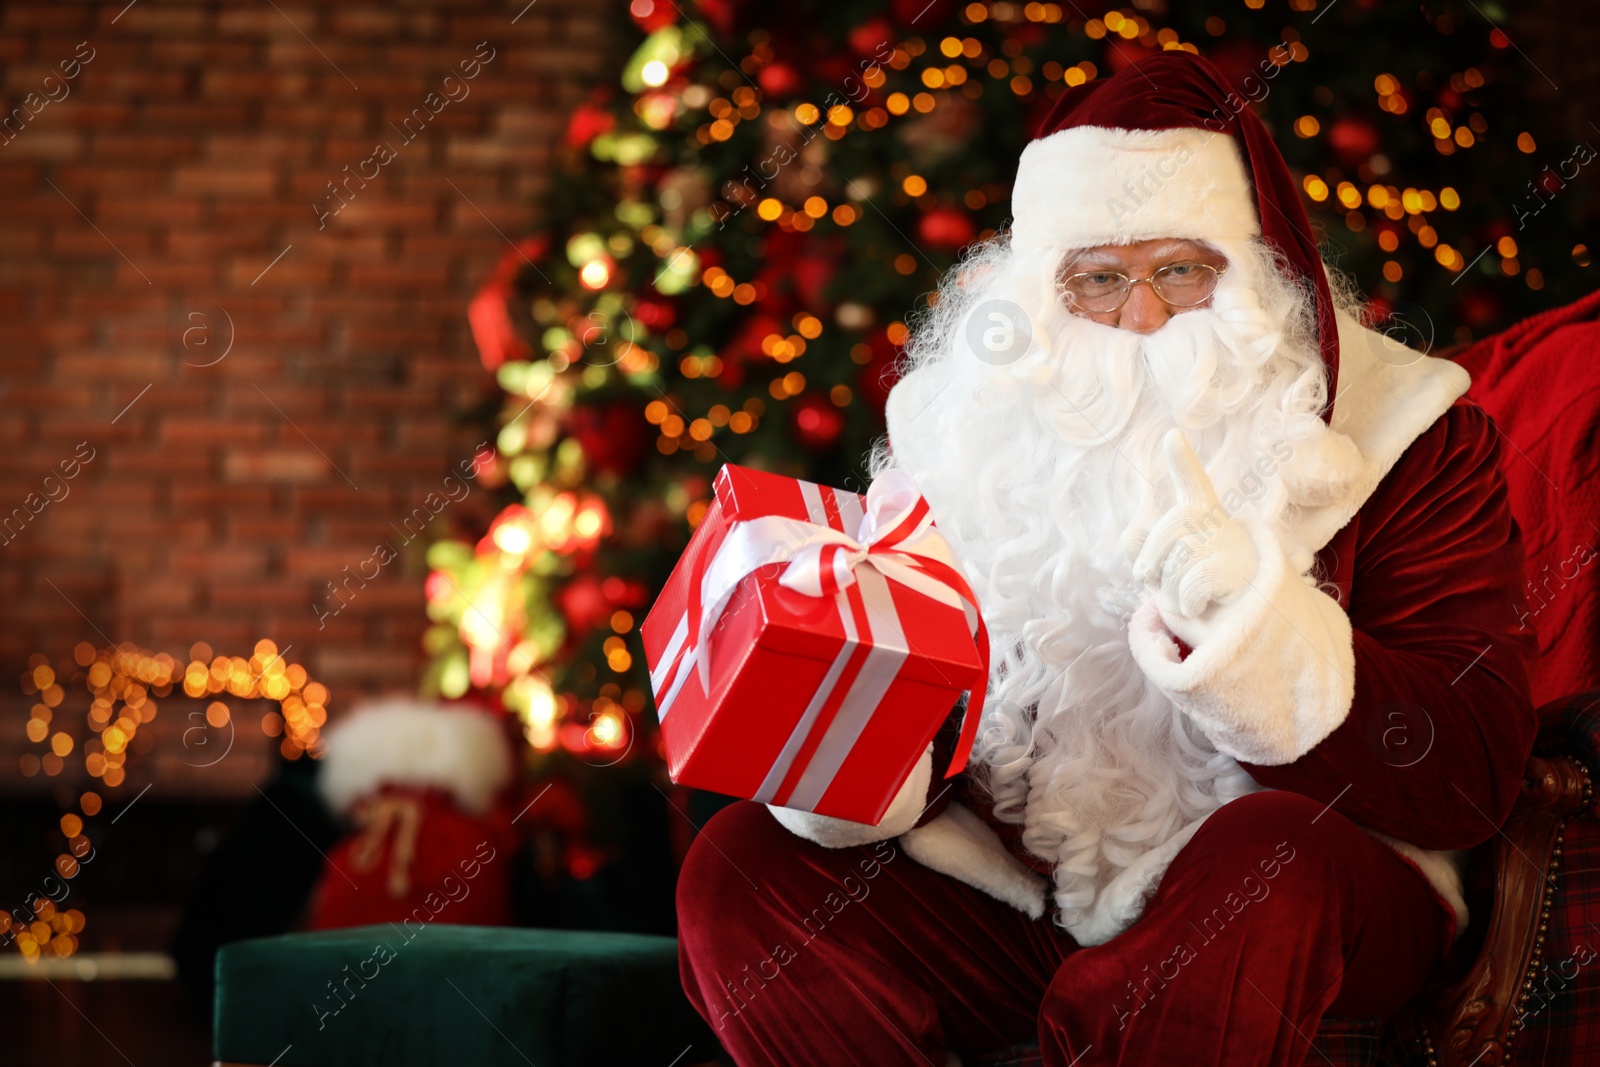 Photo of Santa Claus with gift box near Christmas tree indoors